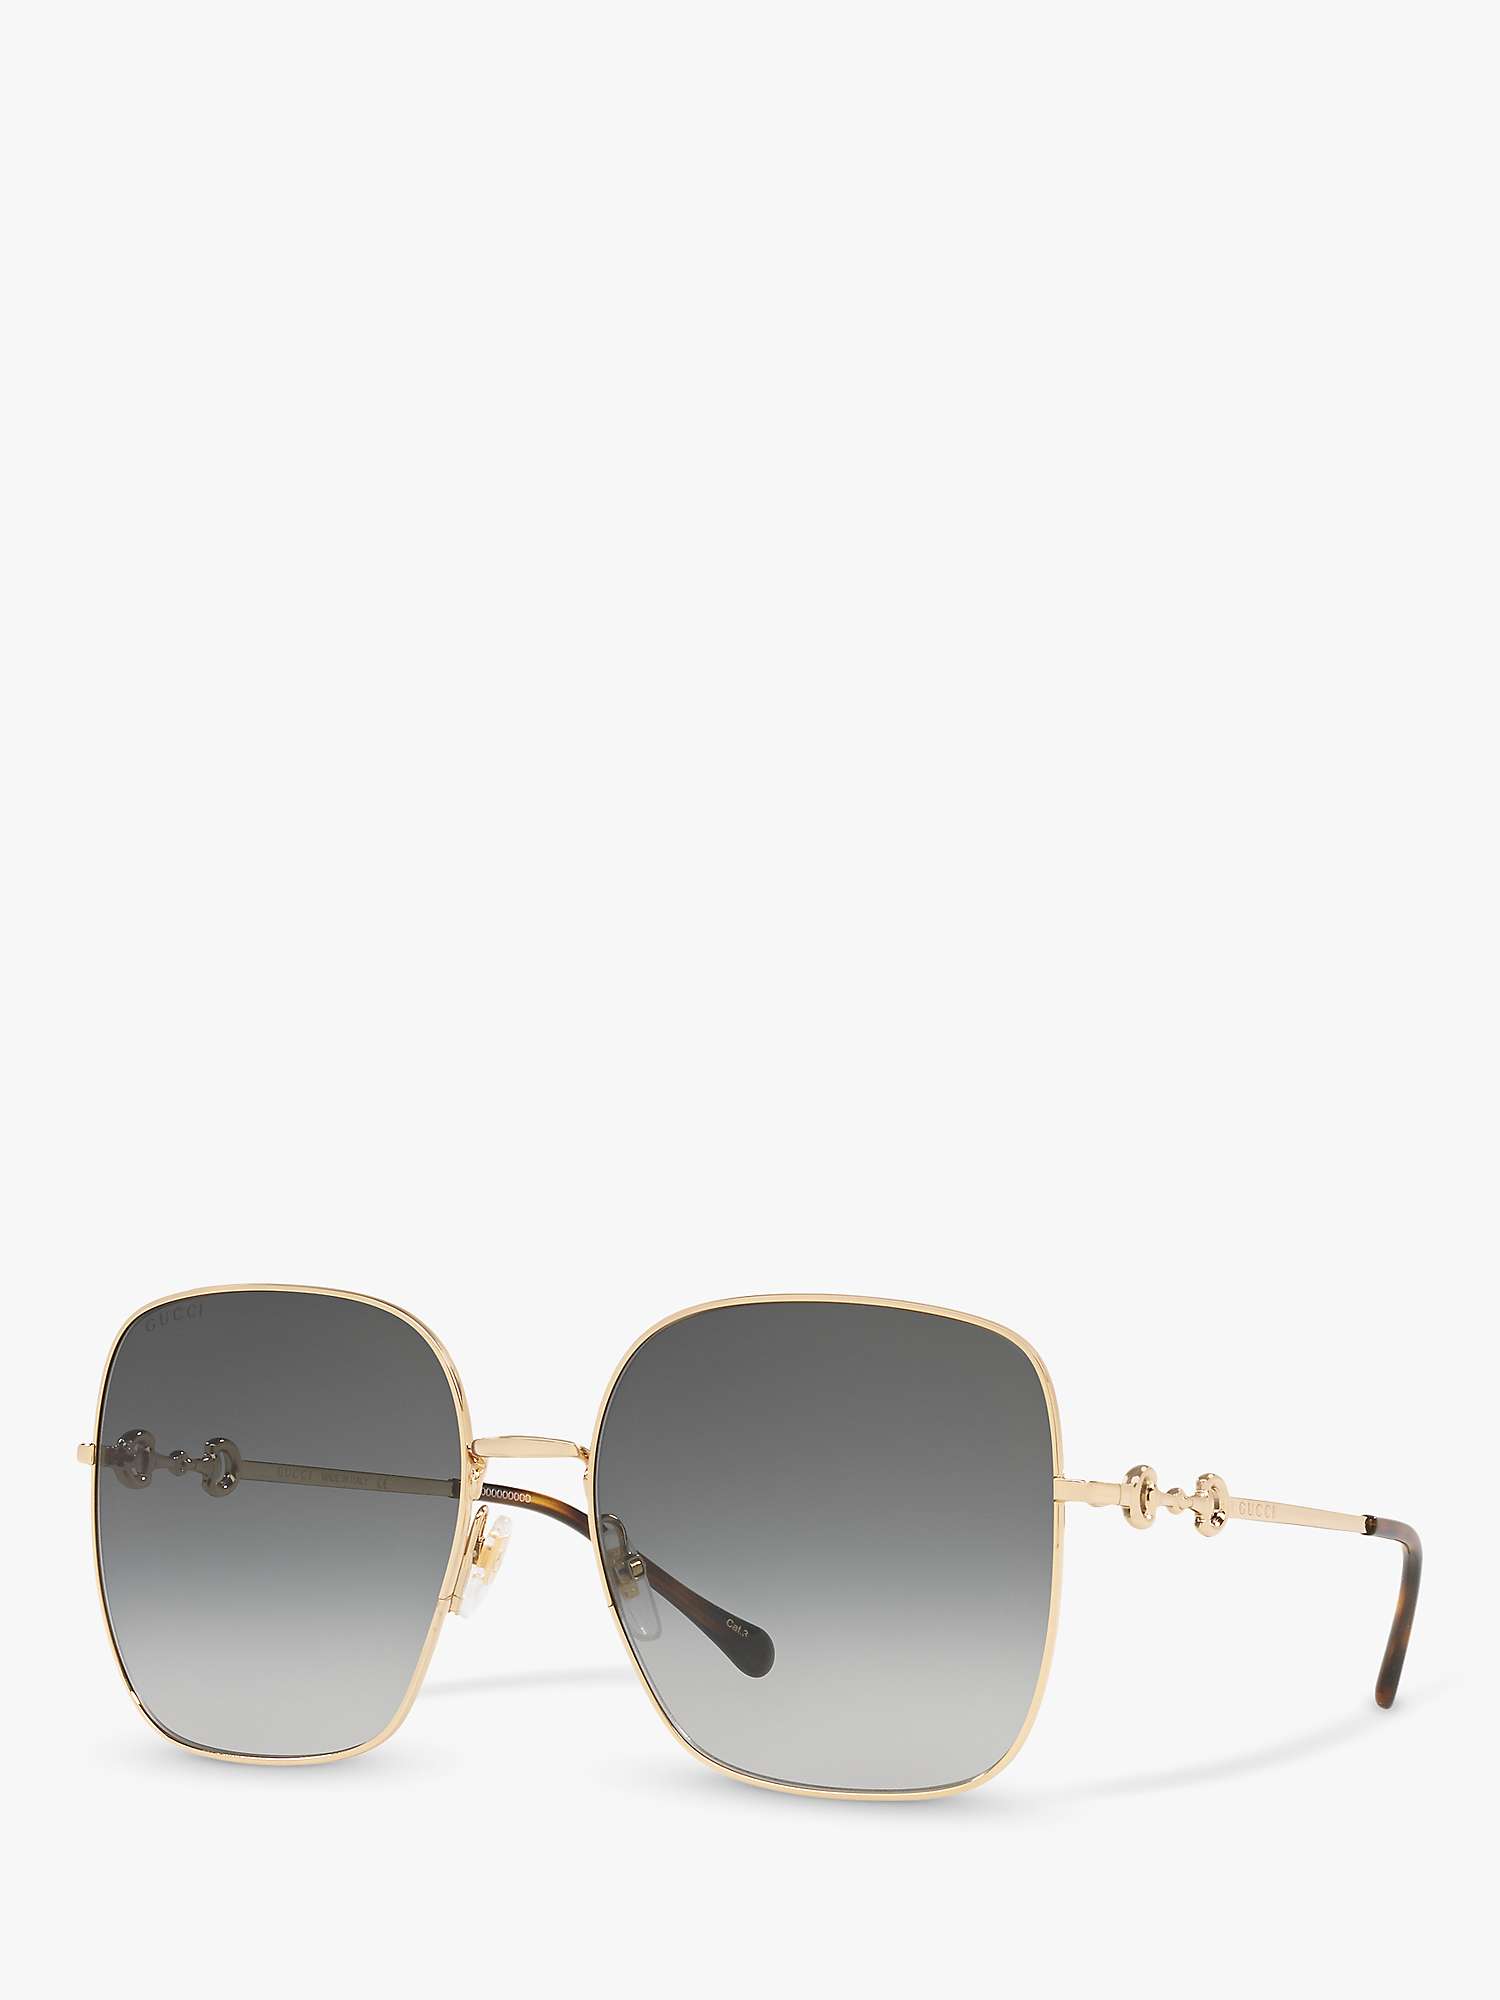 Gucci GG0879S Women's Square Sunglasses, Gold/Grey Gradient at John Lewis &  Partners